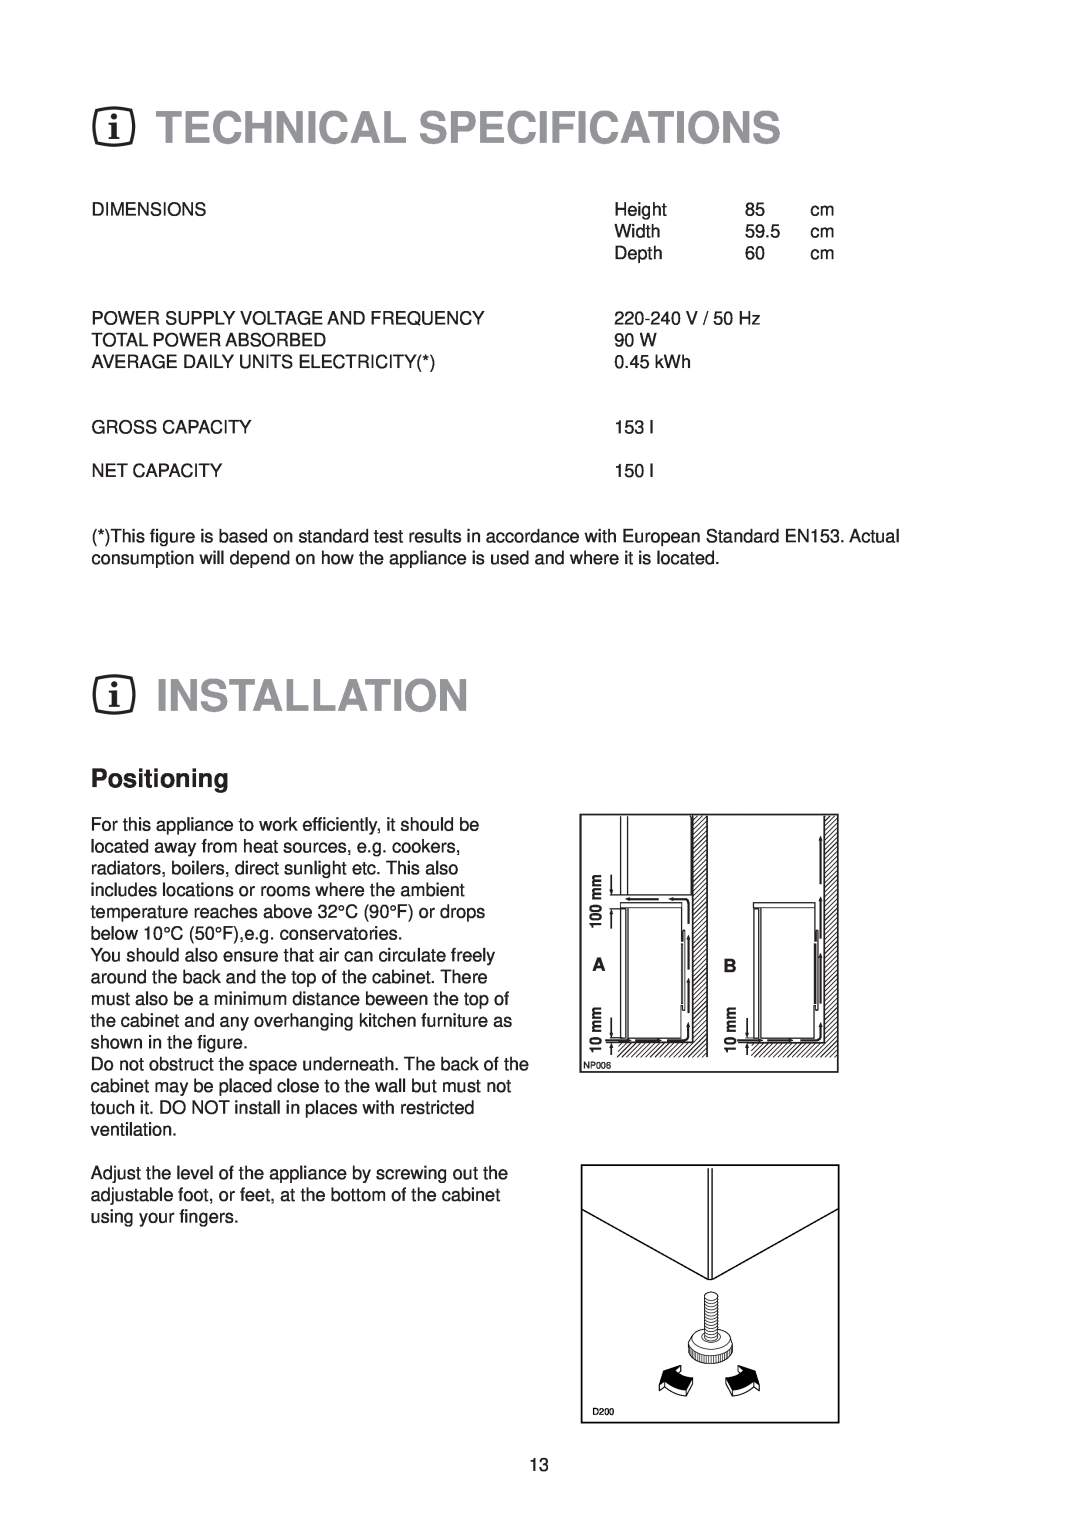 Zanussi ZT 57 RM manual Technical Specifications, Installation, Positioning 